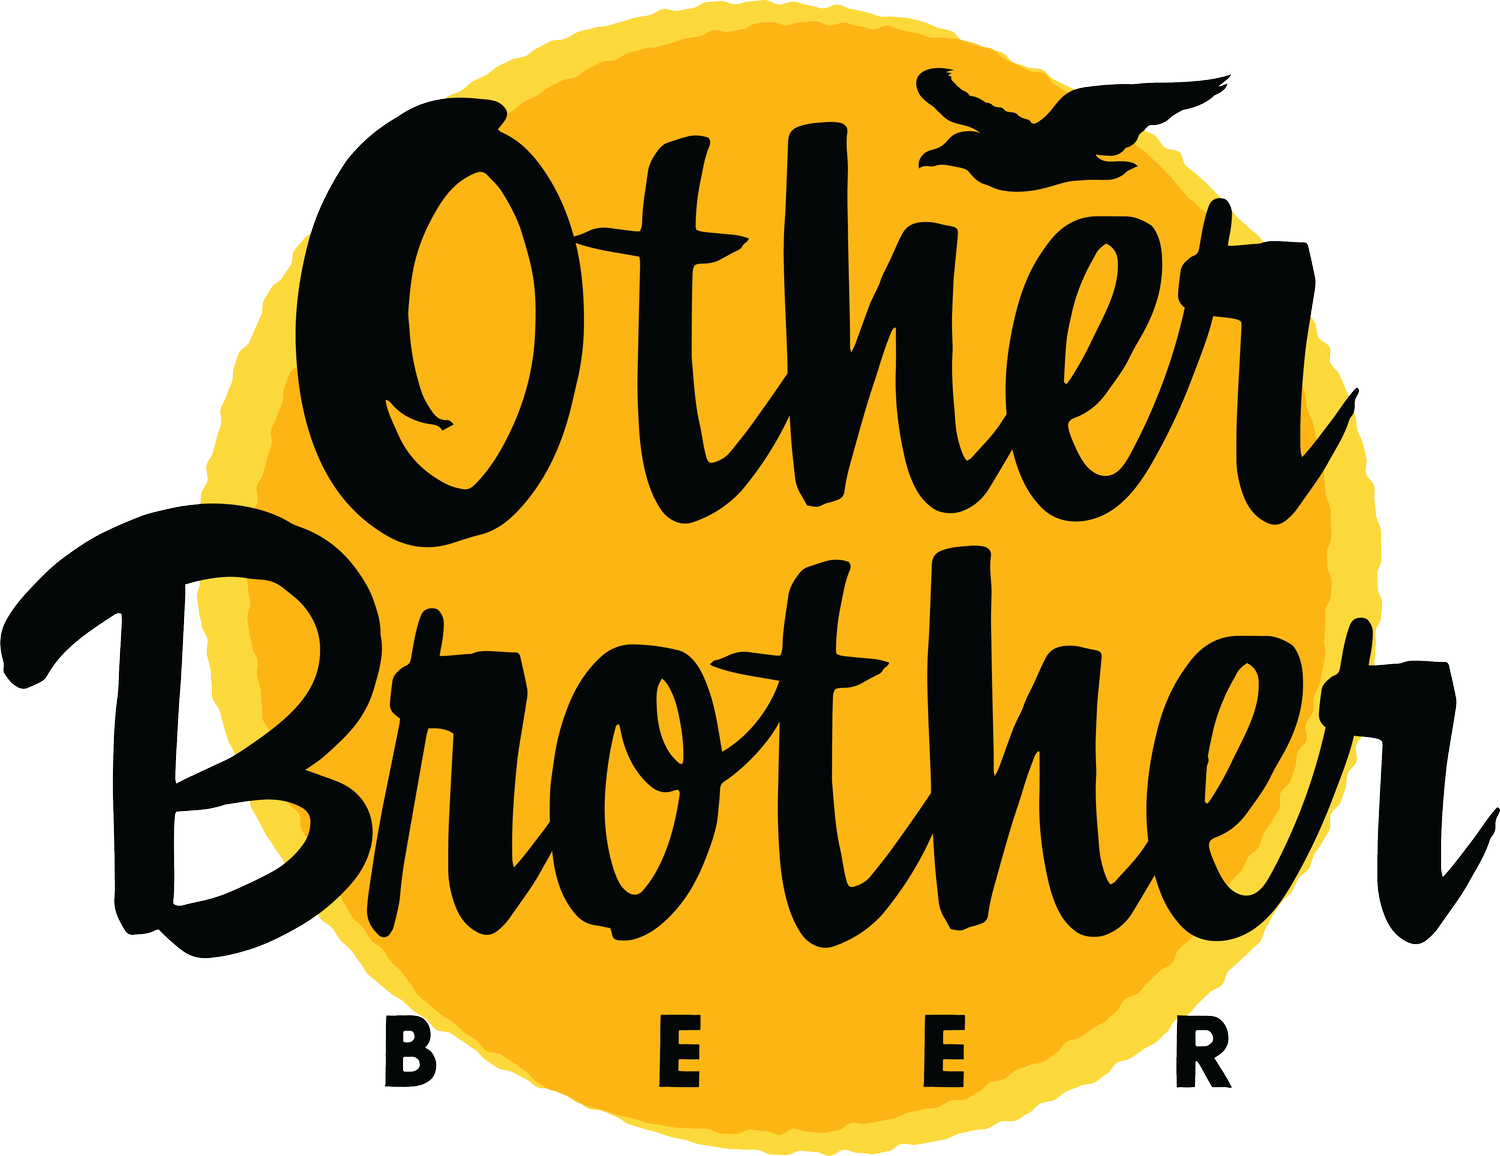 Other Brother Beer Co. Monterey Brewery and Restaurant